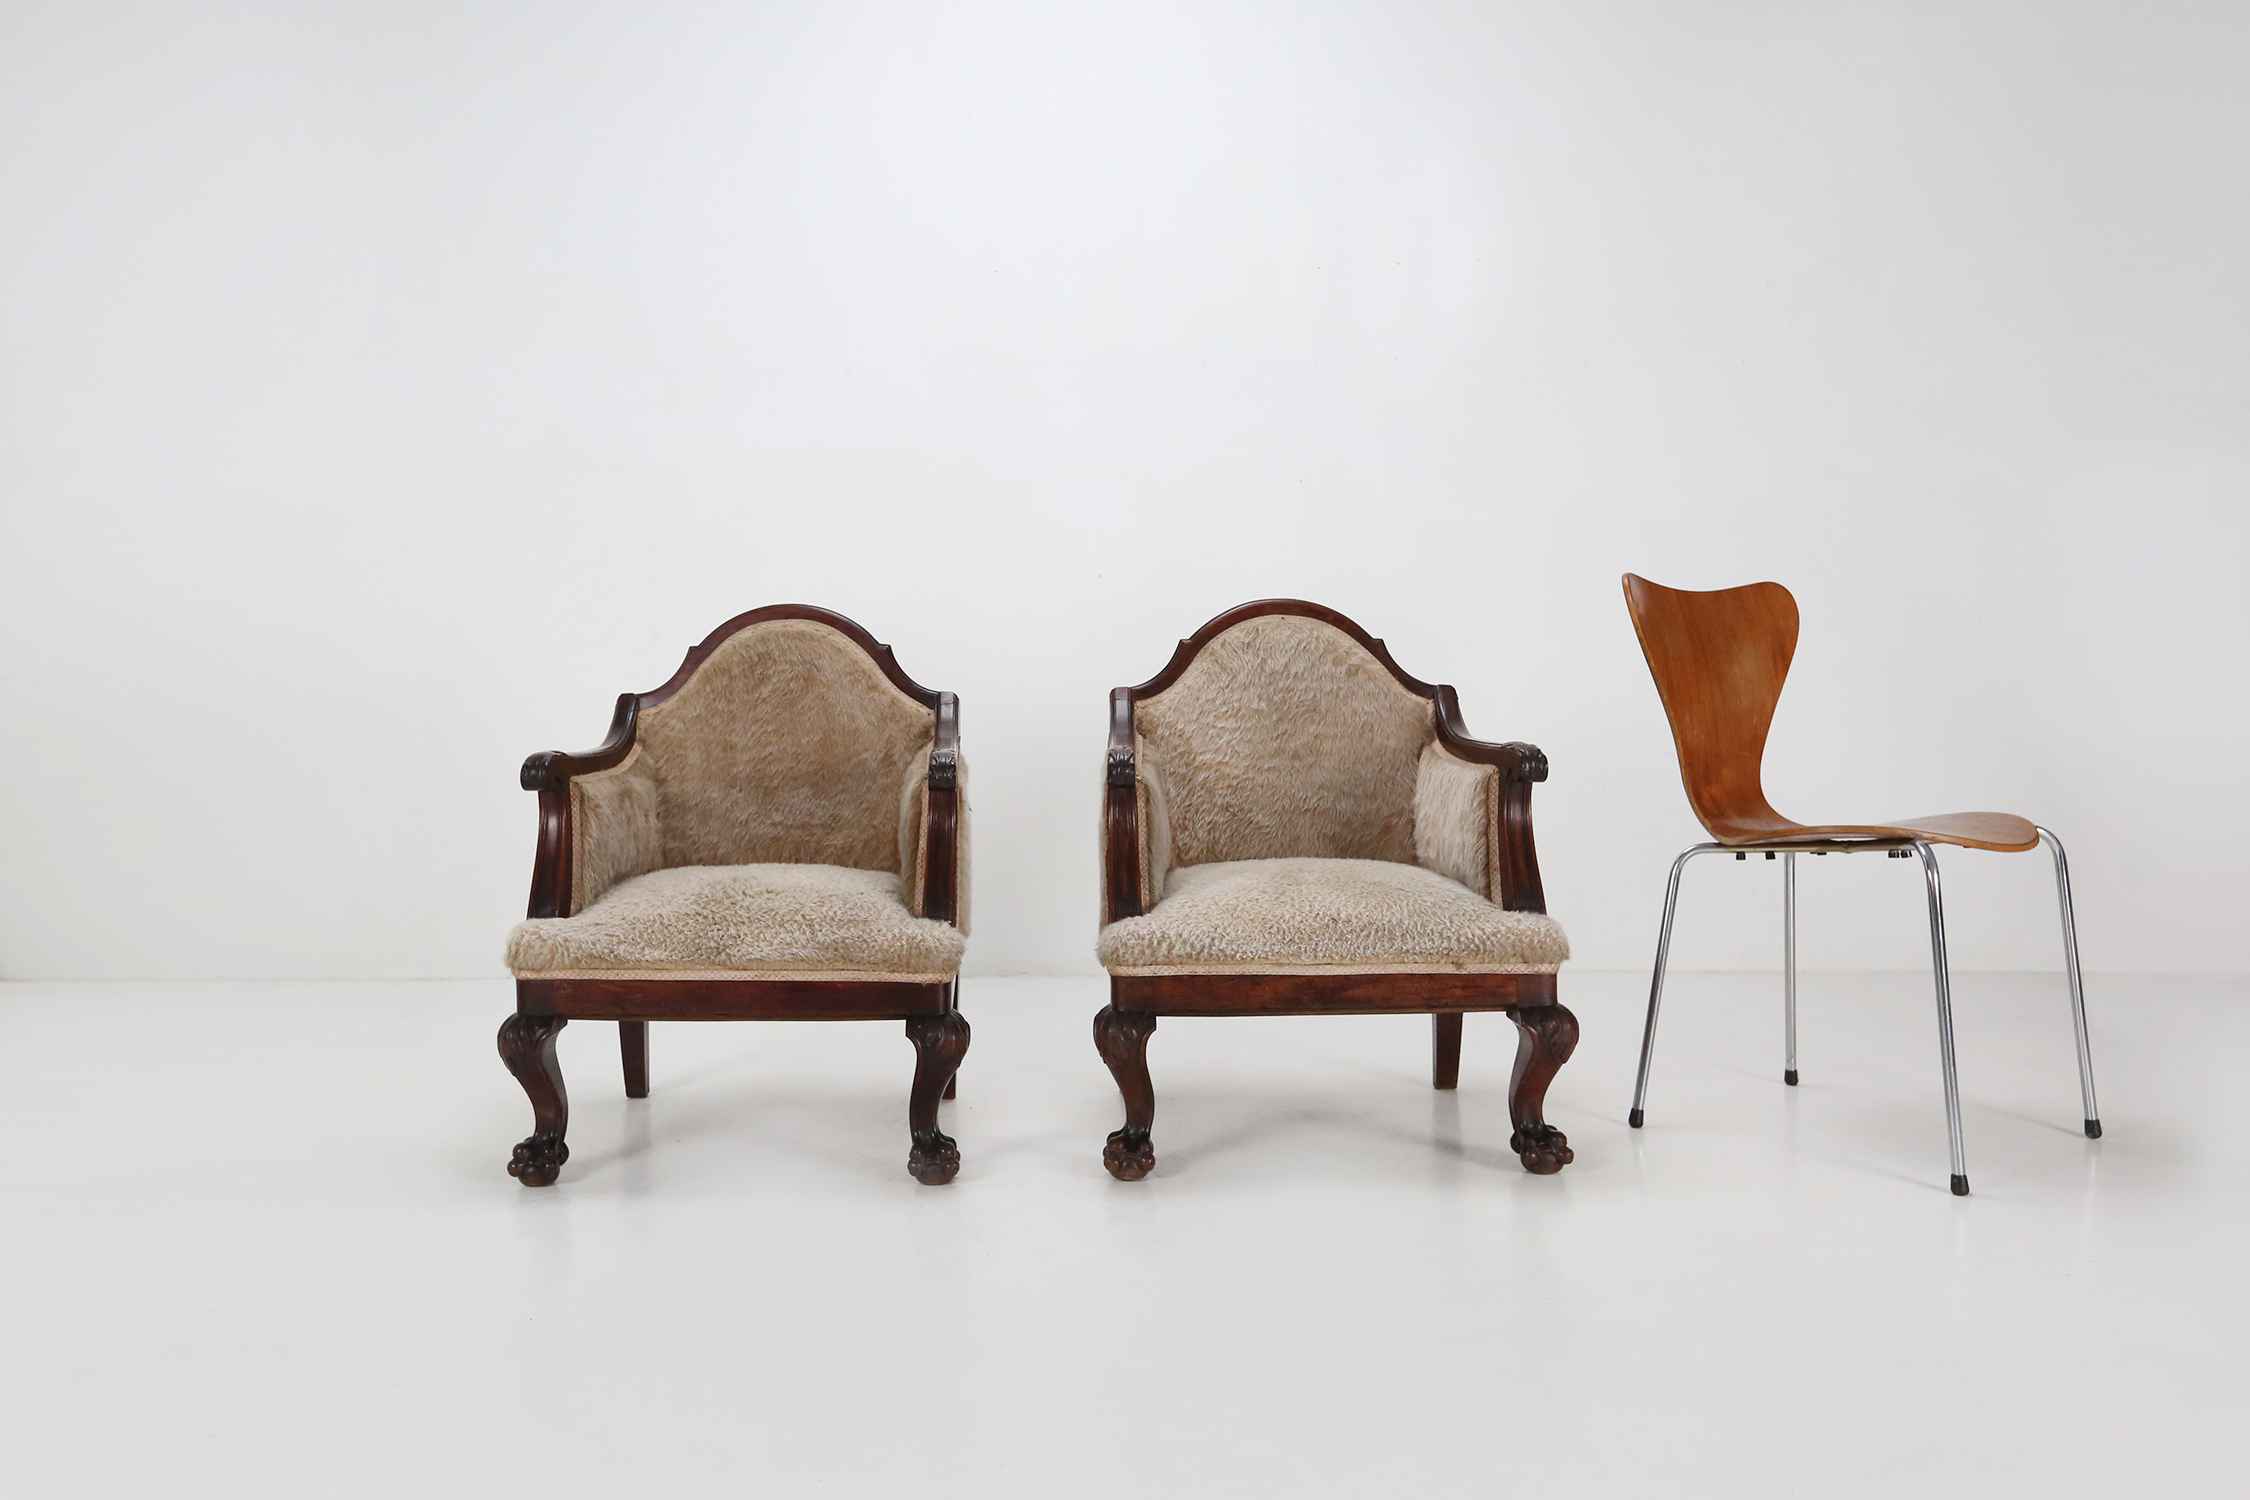 Set of Empire armchairs Ca.1820